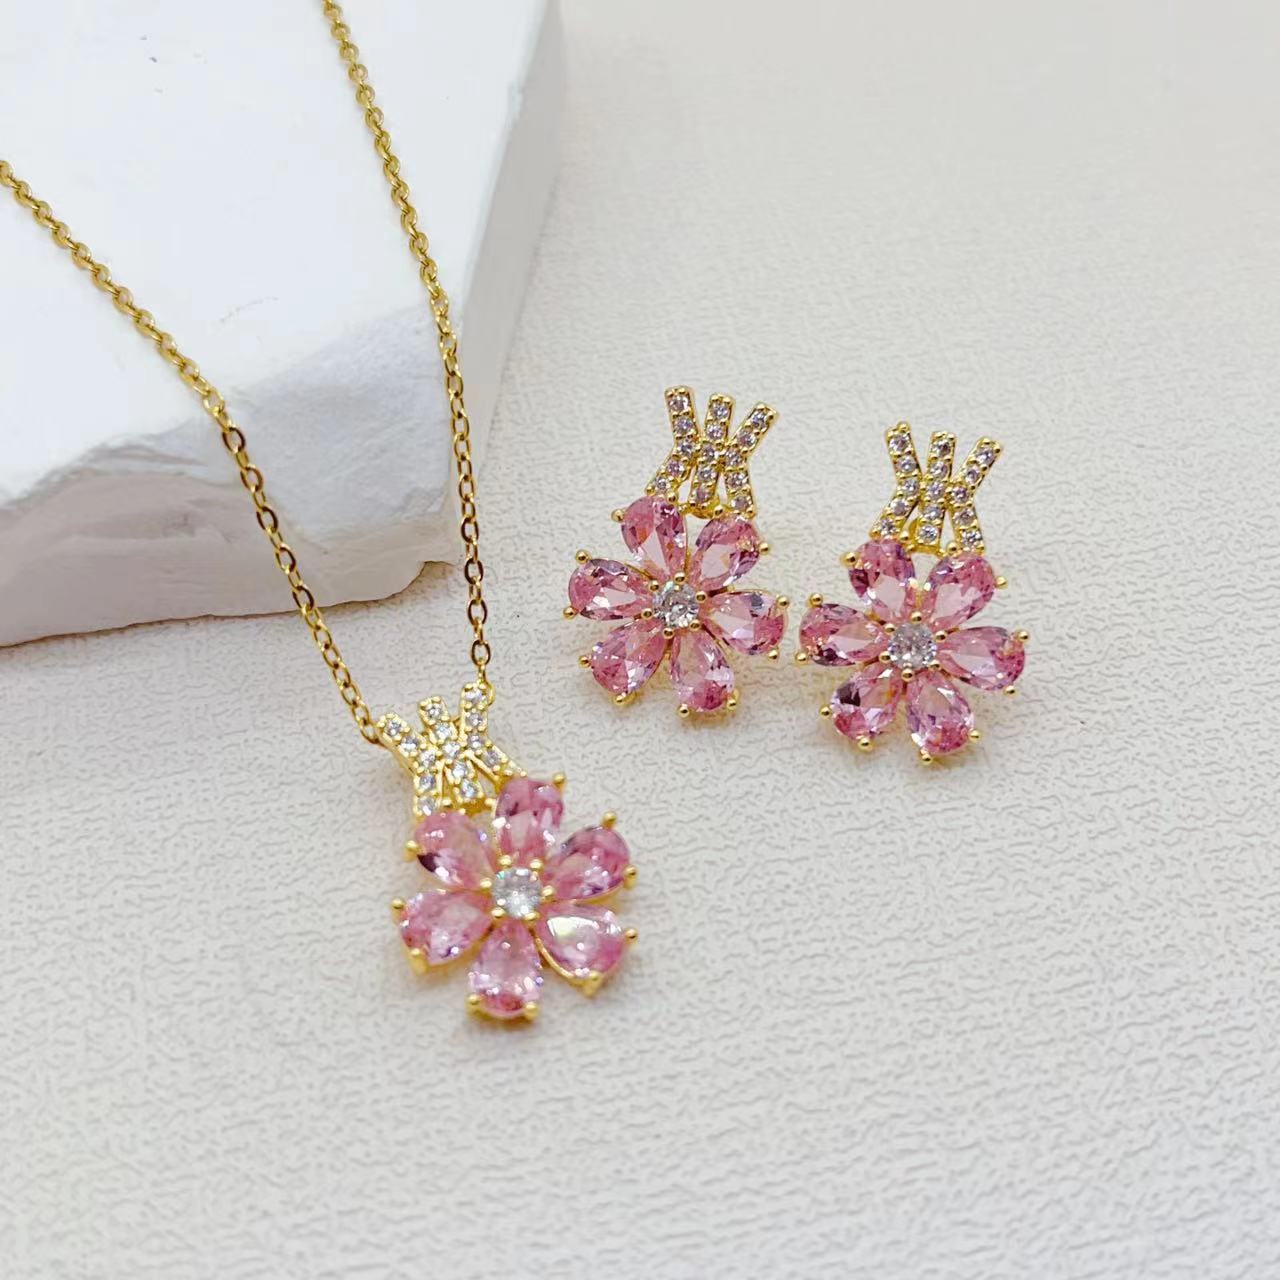 Glamorous Copper Plated Gold Hand Inlaid Pink Water Drop Flower Fashion Necklace and Earrings Set